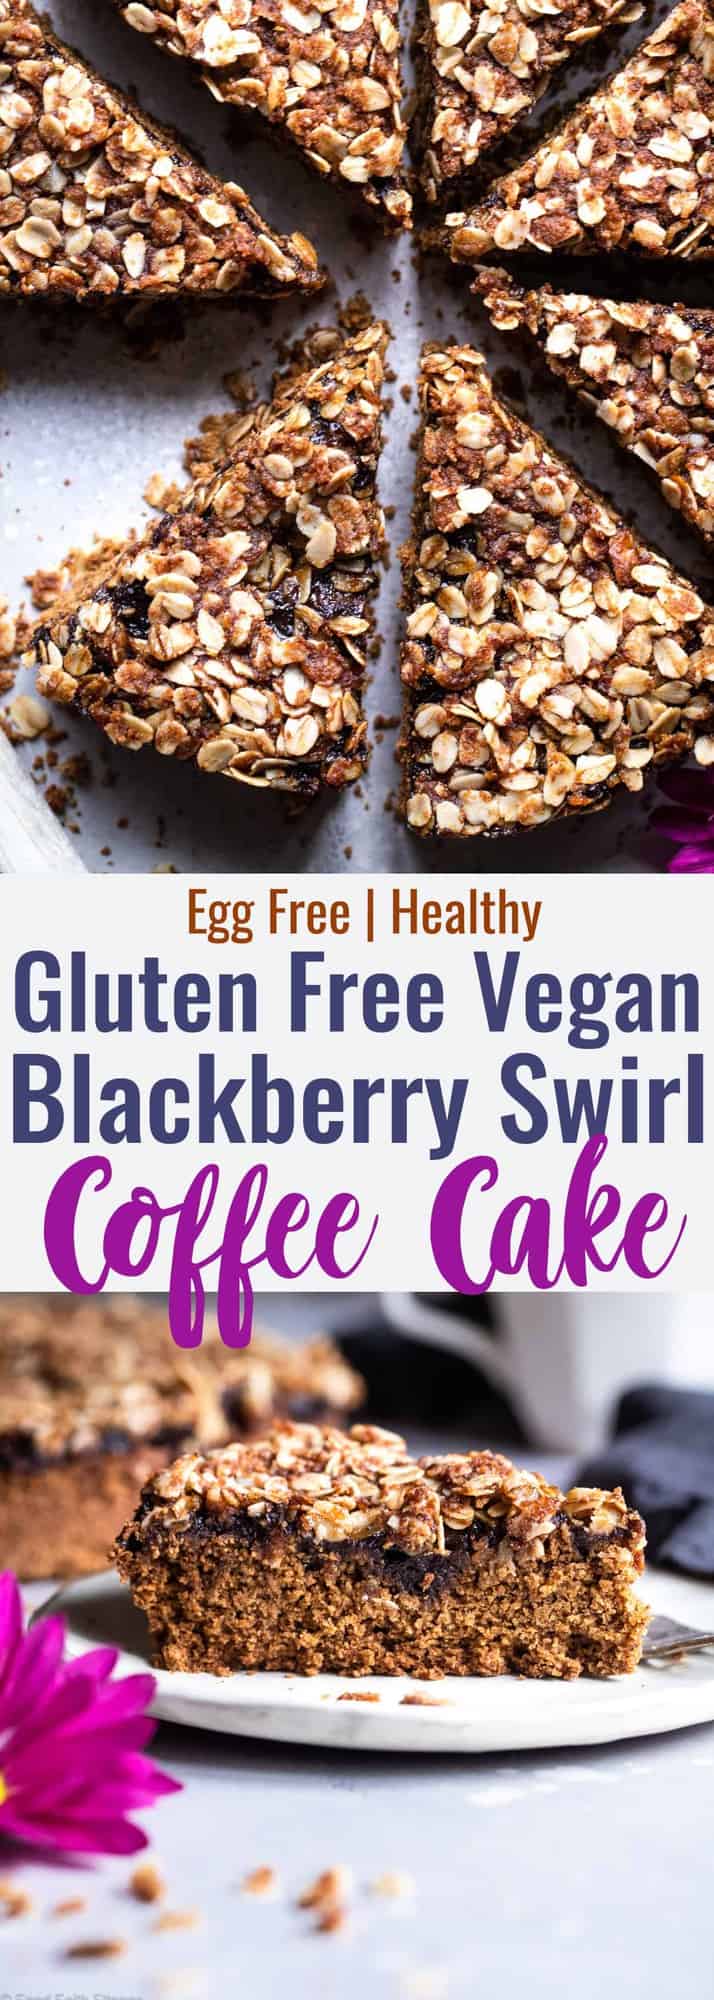 Gluten Free Vegan Coffee Cake - This tender, moist Gluten Free Coffee Cake has a tasty blackberry swirl and is loaded with a crunchy, crispy crumble topping! It's sure to be a hit and does not taste healthy! | #Foodfaithfitness | #Glutenfree #Vegan #dairyfree #eggfree #healthy